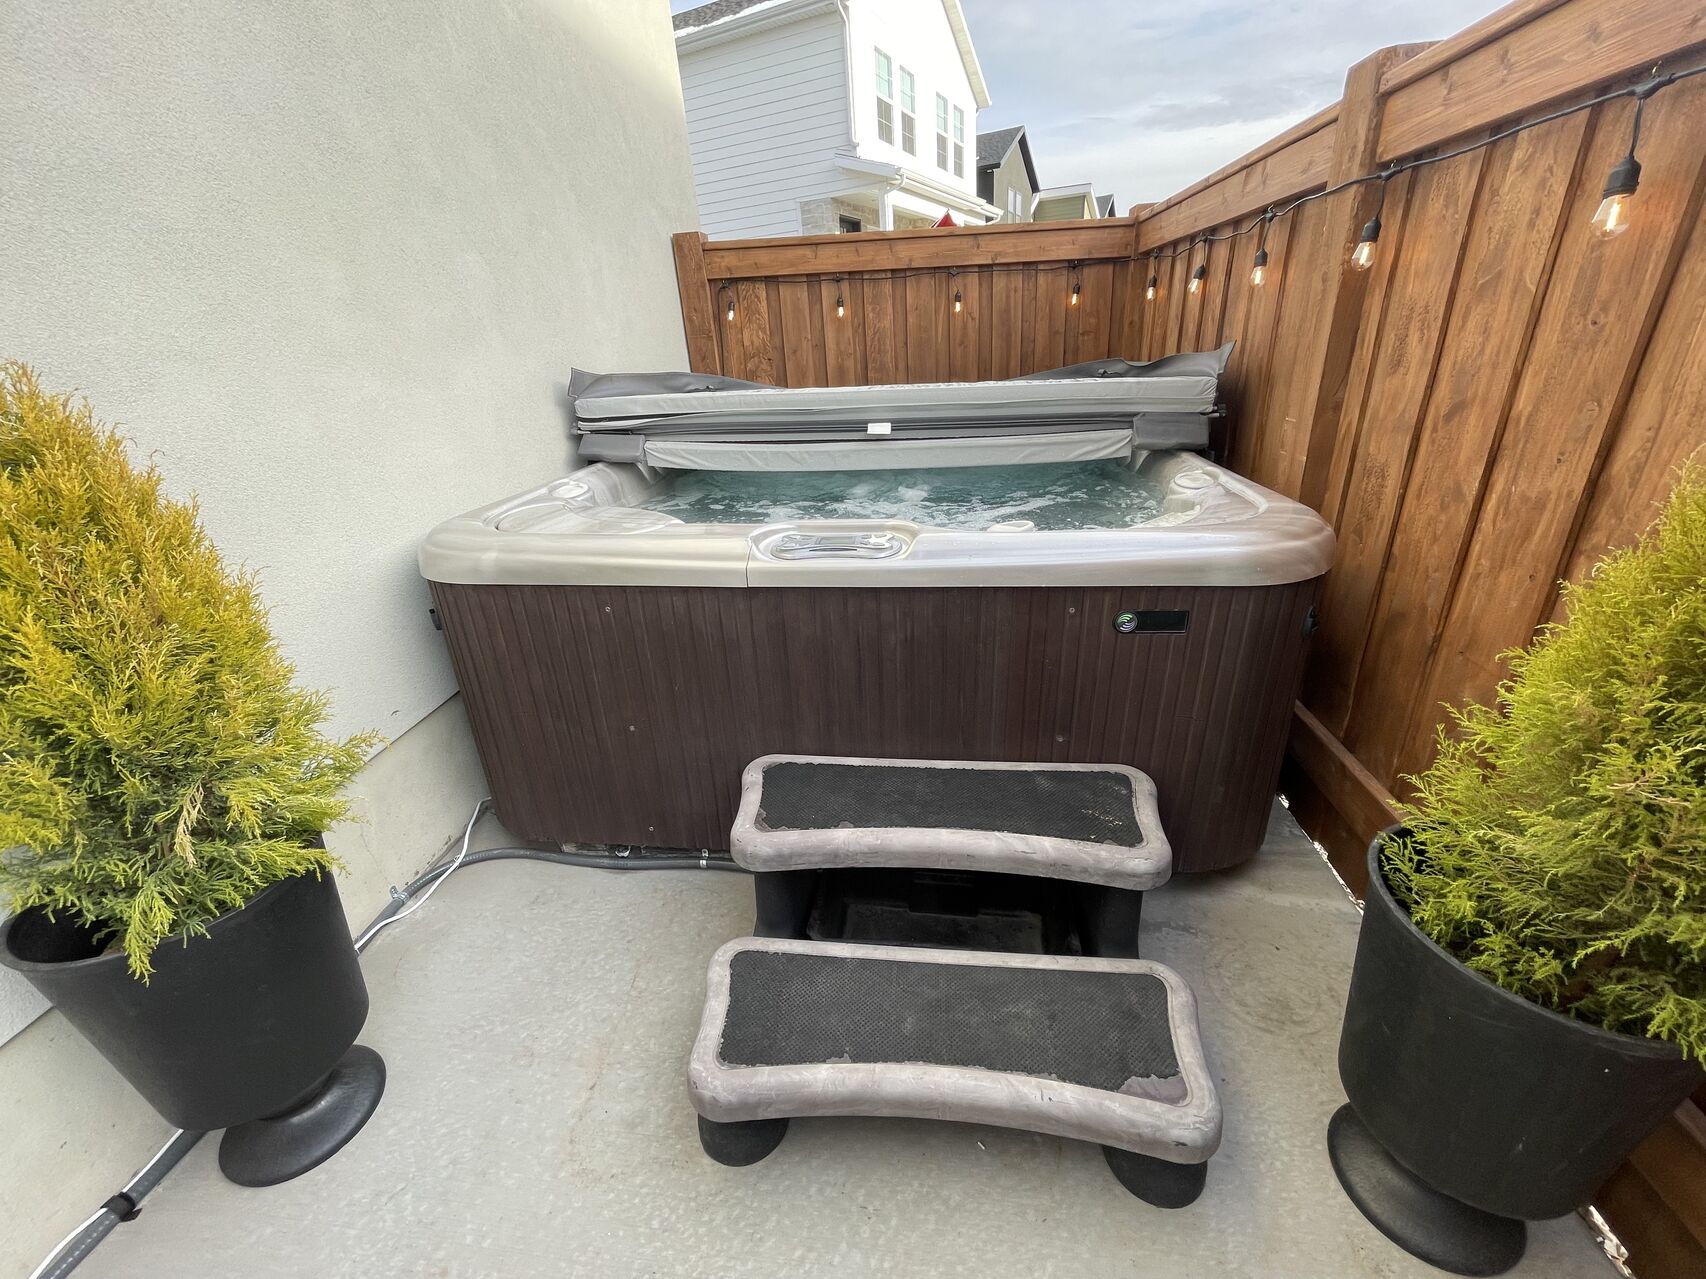 Private hot tub, great private space to relax